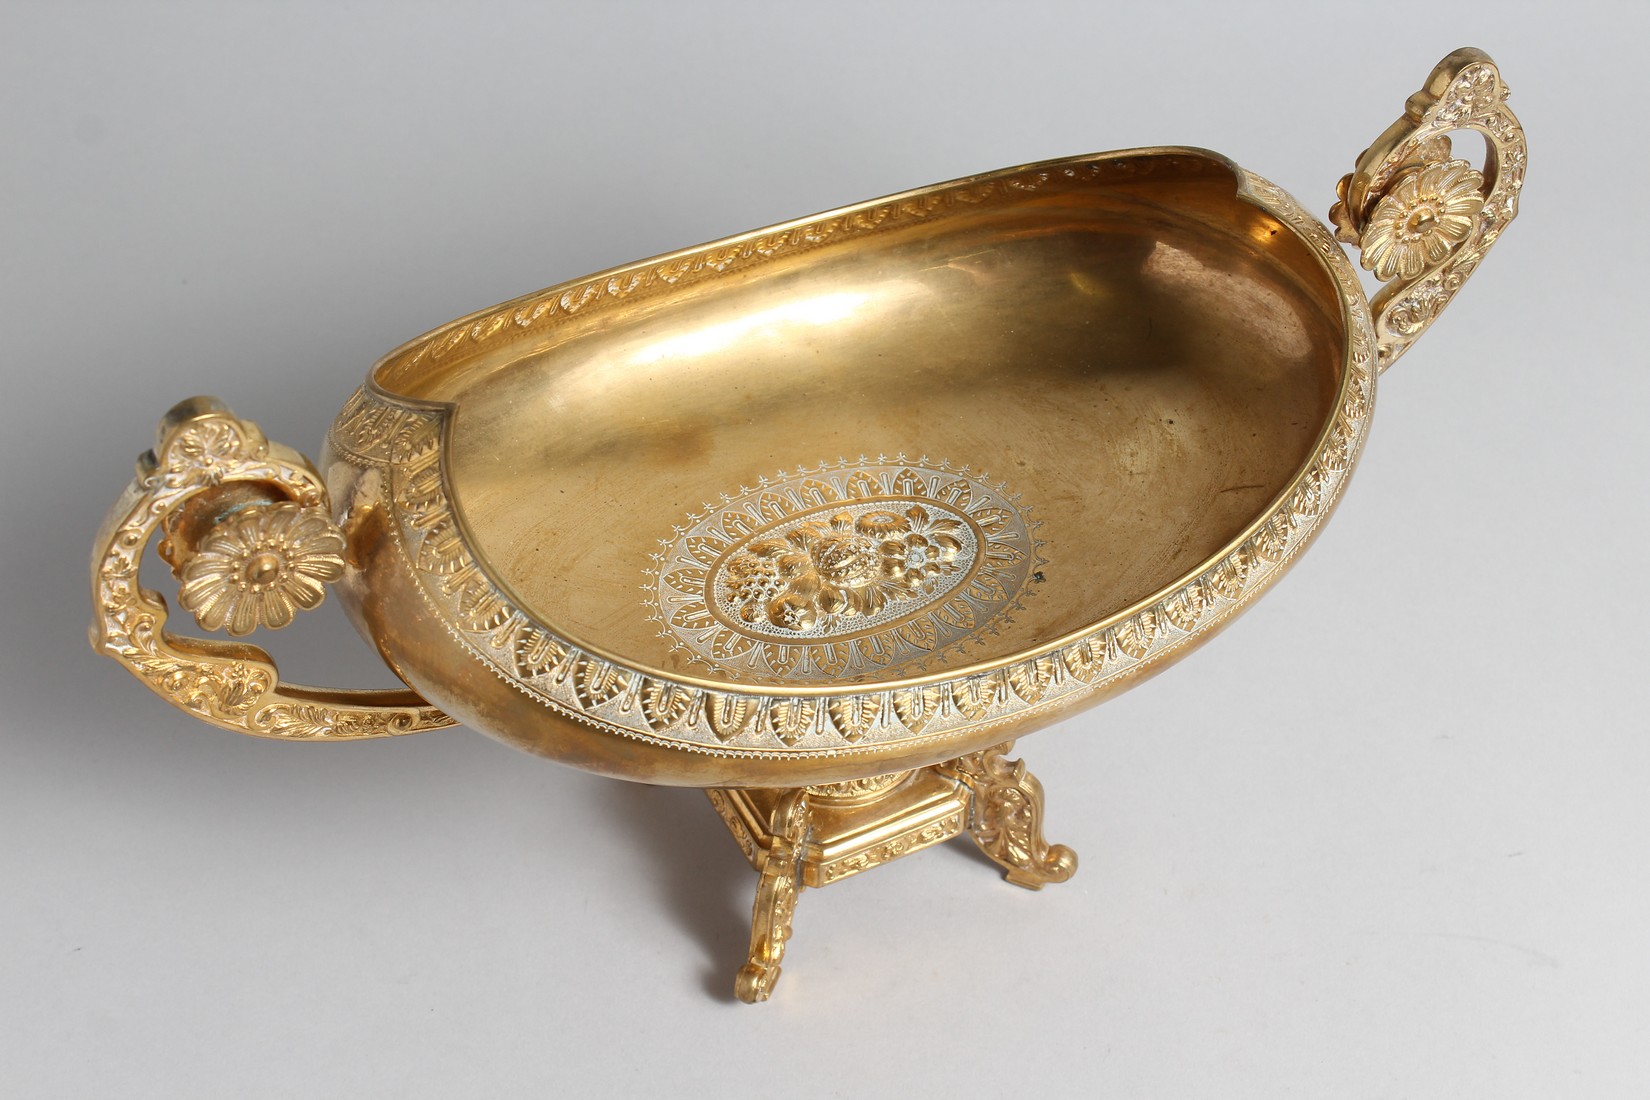 A DECORATIVE CLASSICAL STYLE GILT BRONZE TWIN HANDLED PEDESTAL OVAL SHAPE BOWL. 15.5ins high. - Image 3 of 4